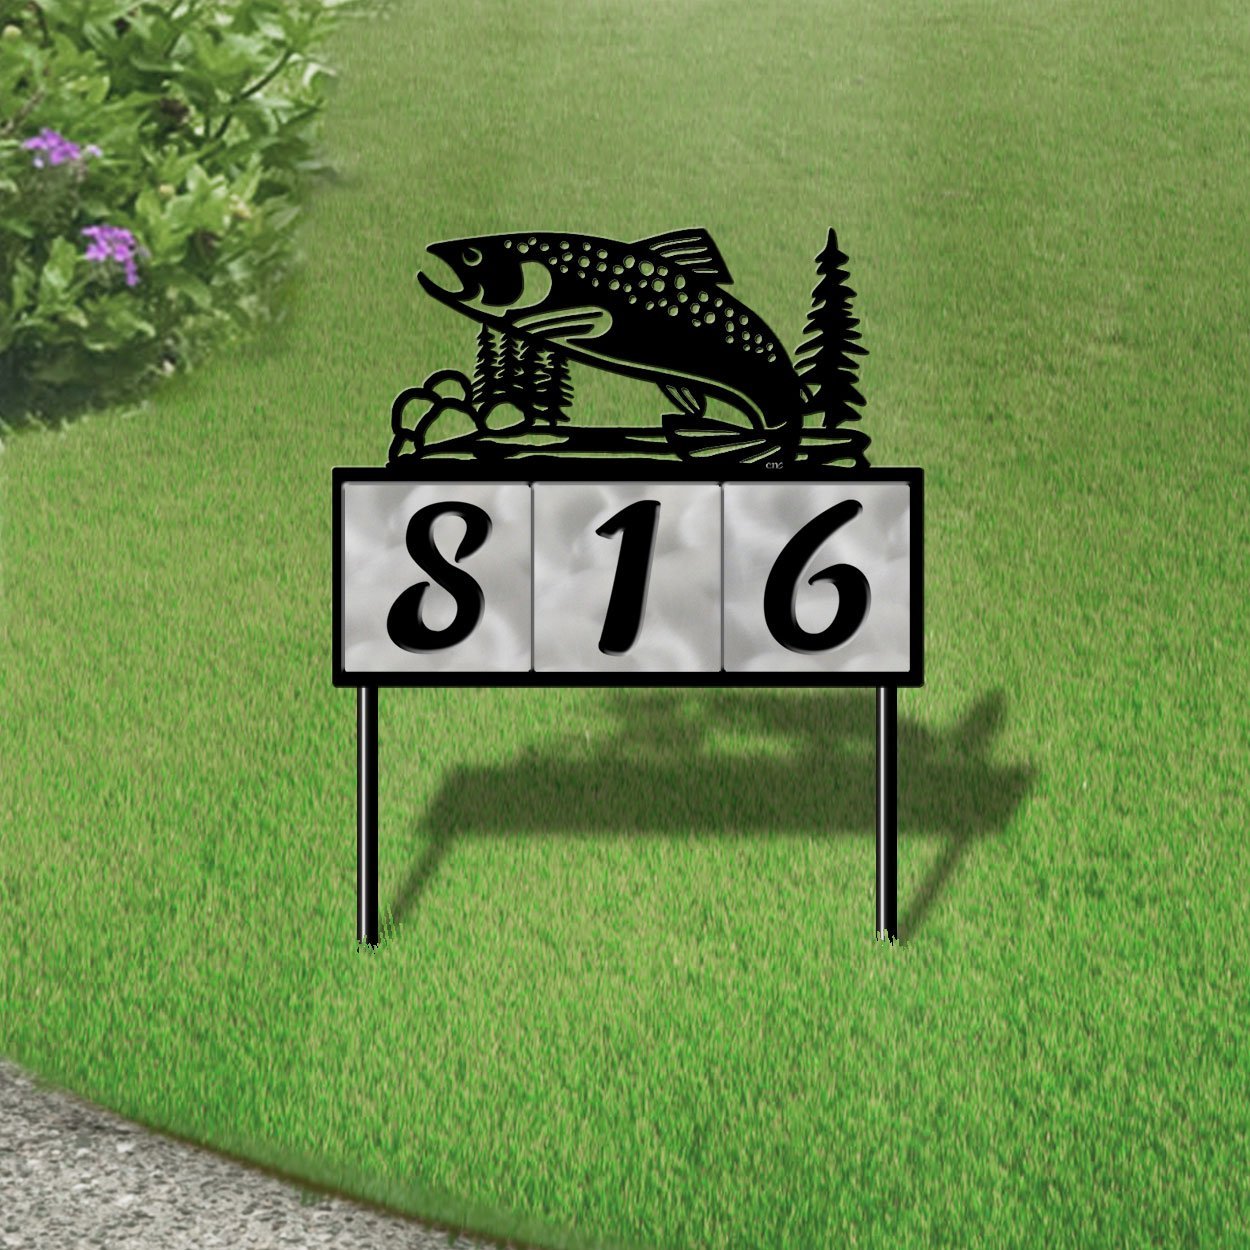 610253 - Jumping Trout in Stream Design 3-Digit Horizontal 6-inch Tile Outdoor House Numbers Yard Sign